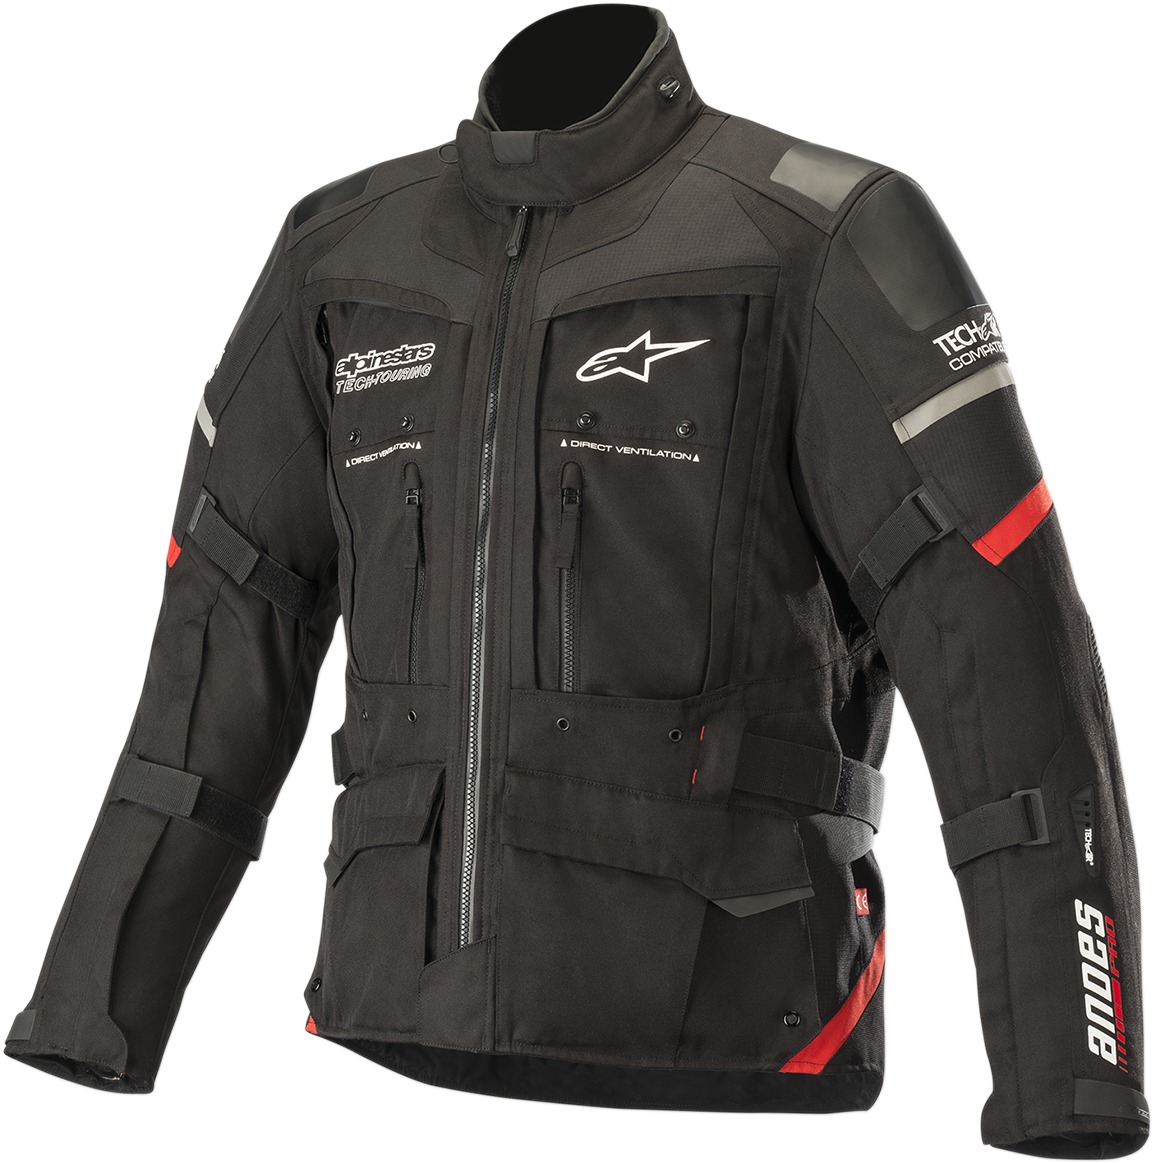 Andes Pro Drystar Street Riding Jacket Black/Gray/Red US 2X-Large - Click Image to Close